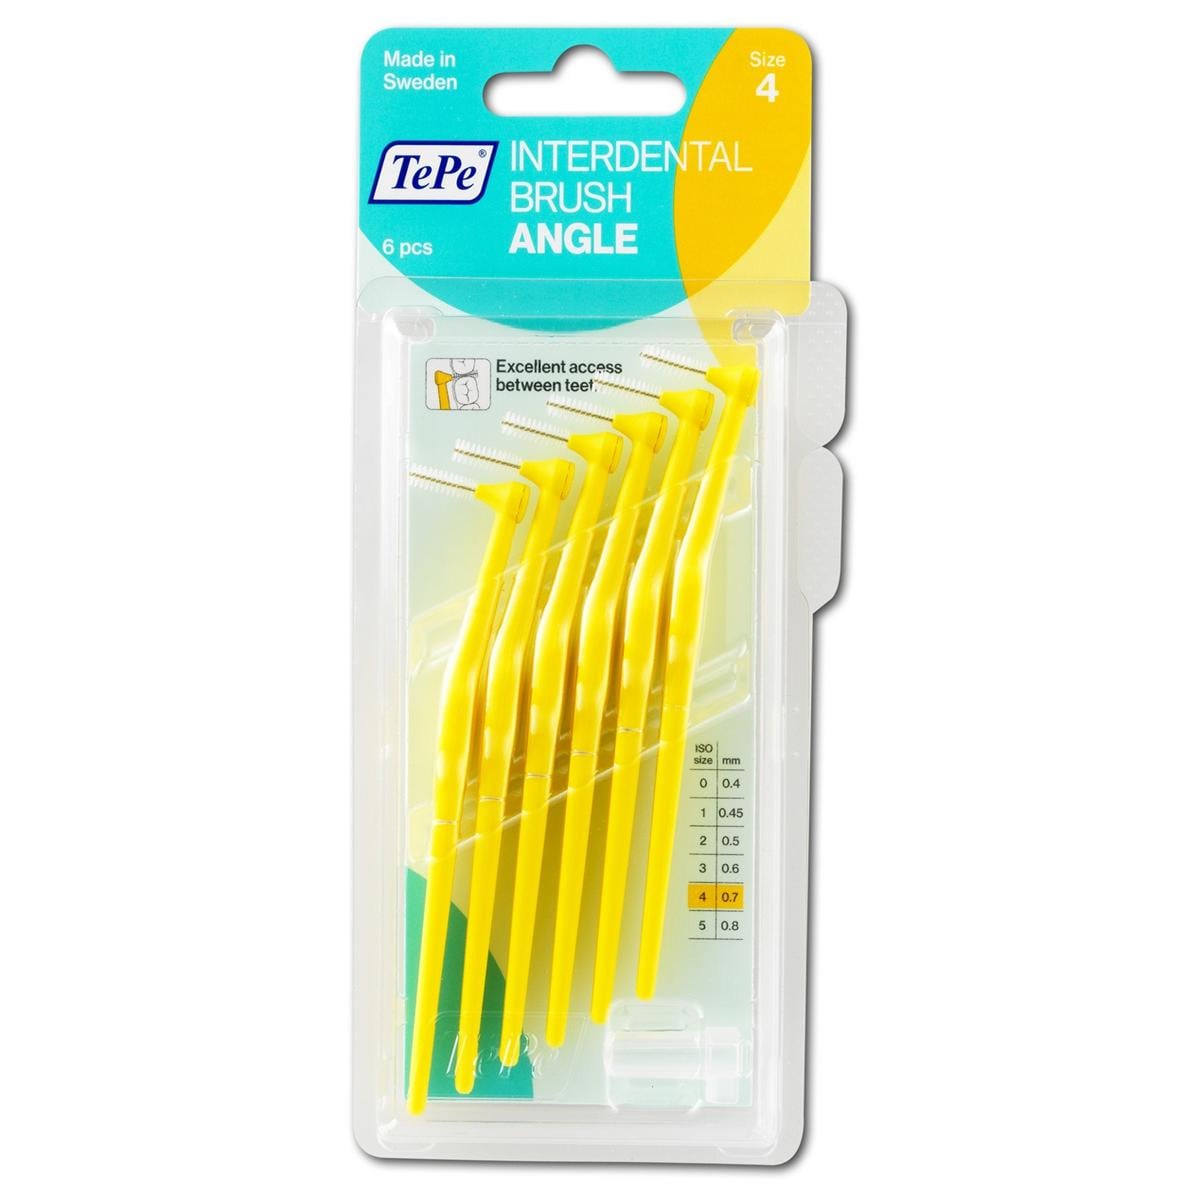 Brossettes interdentaires Angle - jaune, 0.7 mm